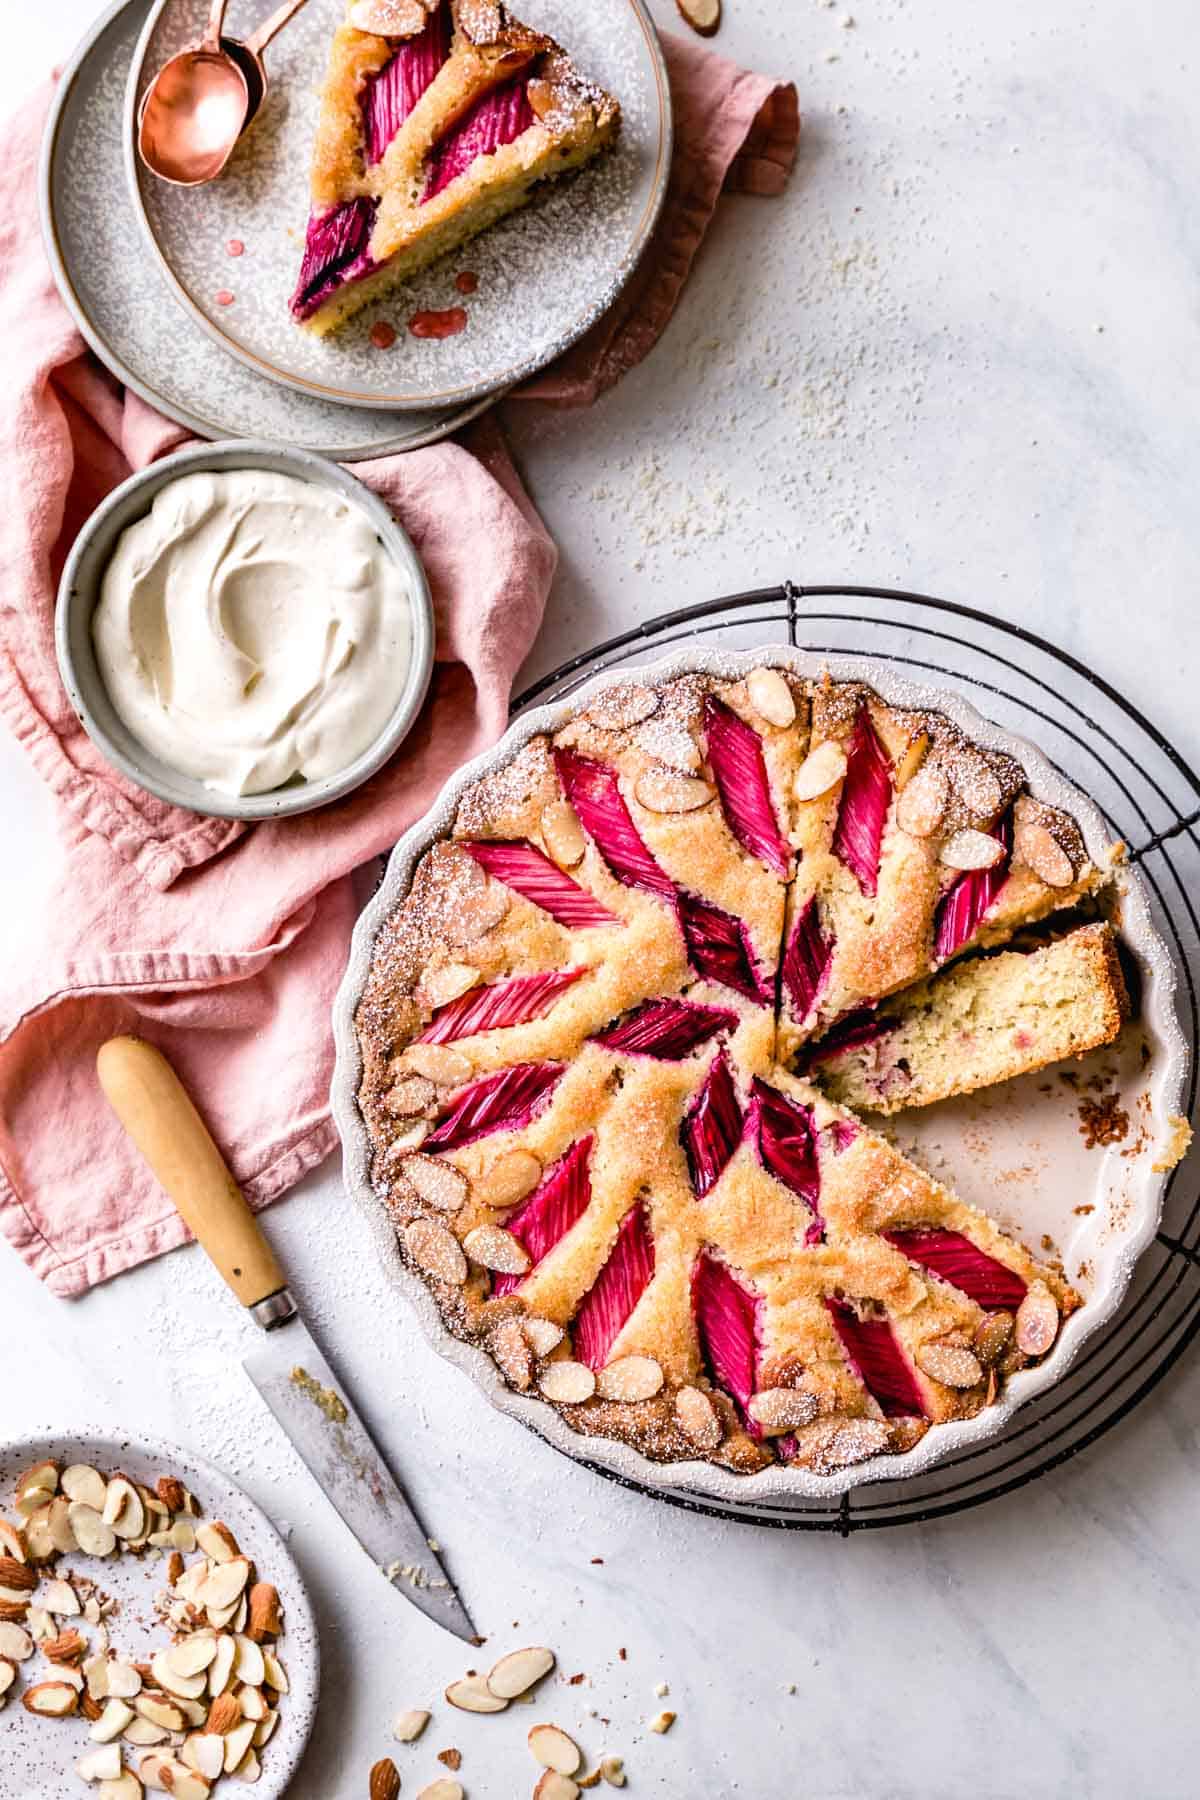 gluten-free rhubarb cake with almond flour, sliced in a pan on marble surface